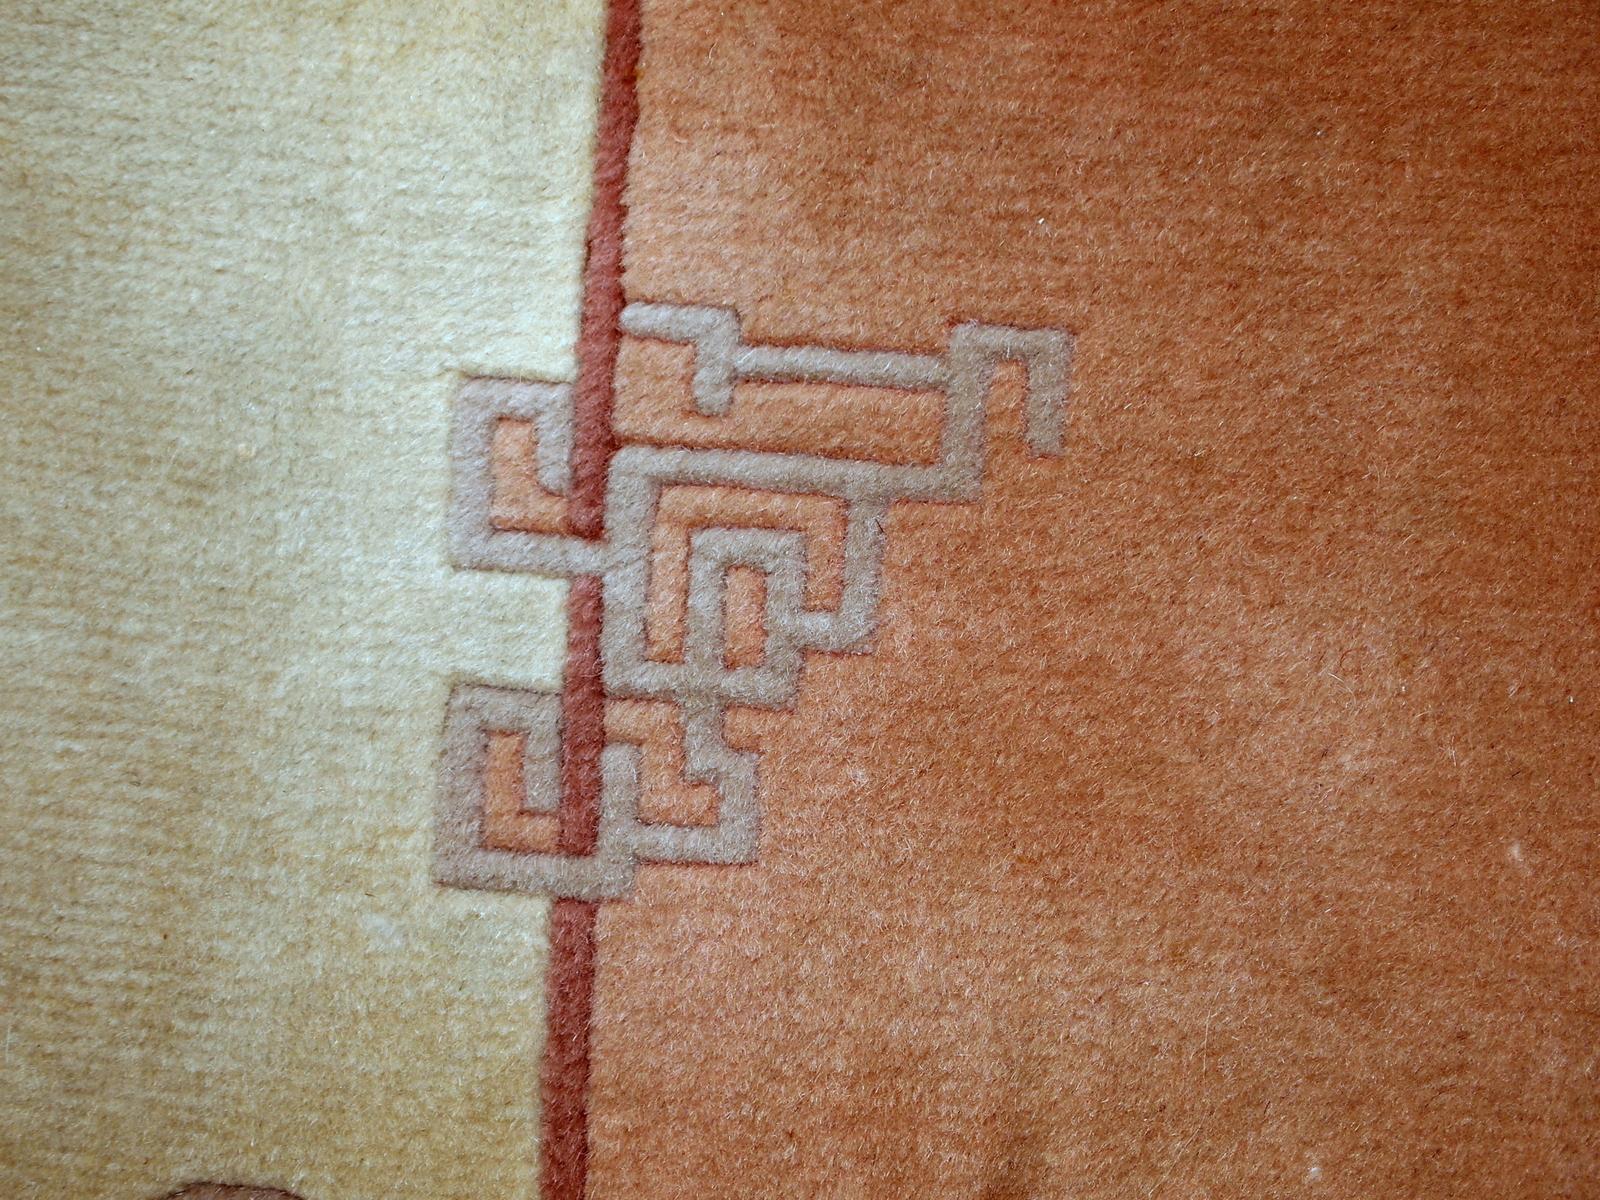 Handmade vintage Art Deco Chinese rug in peach shade. The rug is from the end of 20th century in original good condition.

-Condition: Original good,

-circa 1970s,

-Size: 2.2' x 4.8' (69cm x 147cm),

-Material: Wool,

-Country of origin: